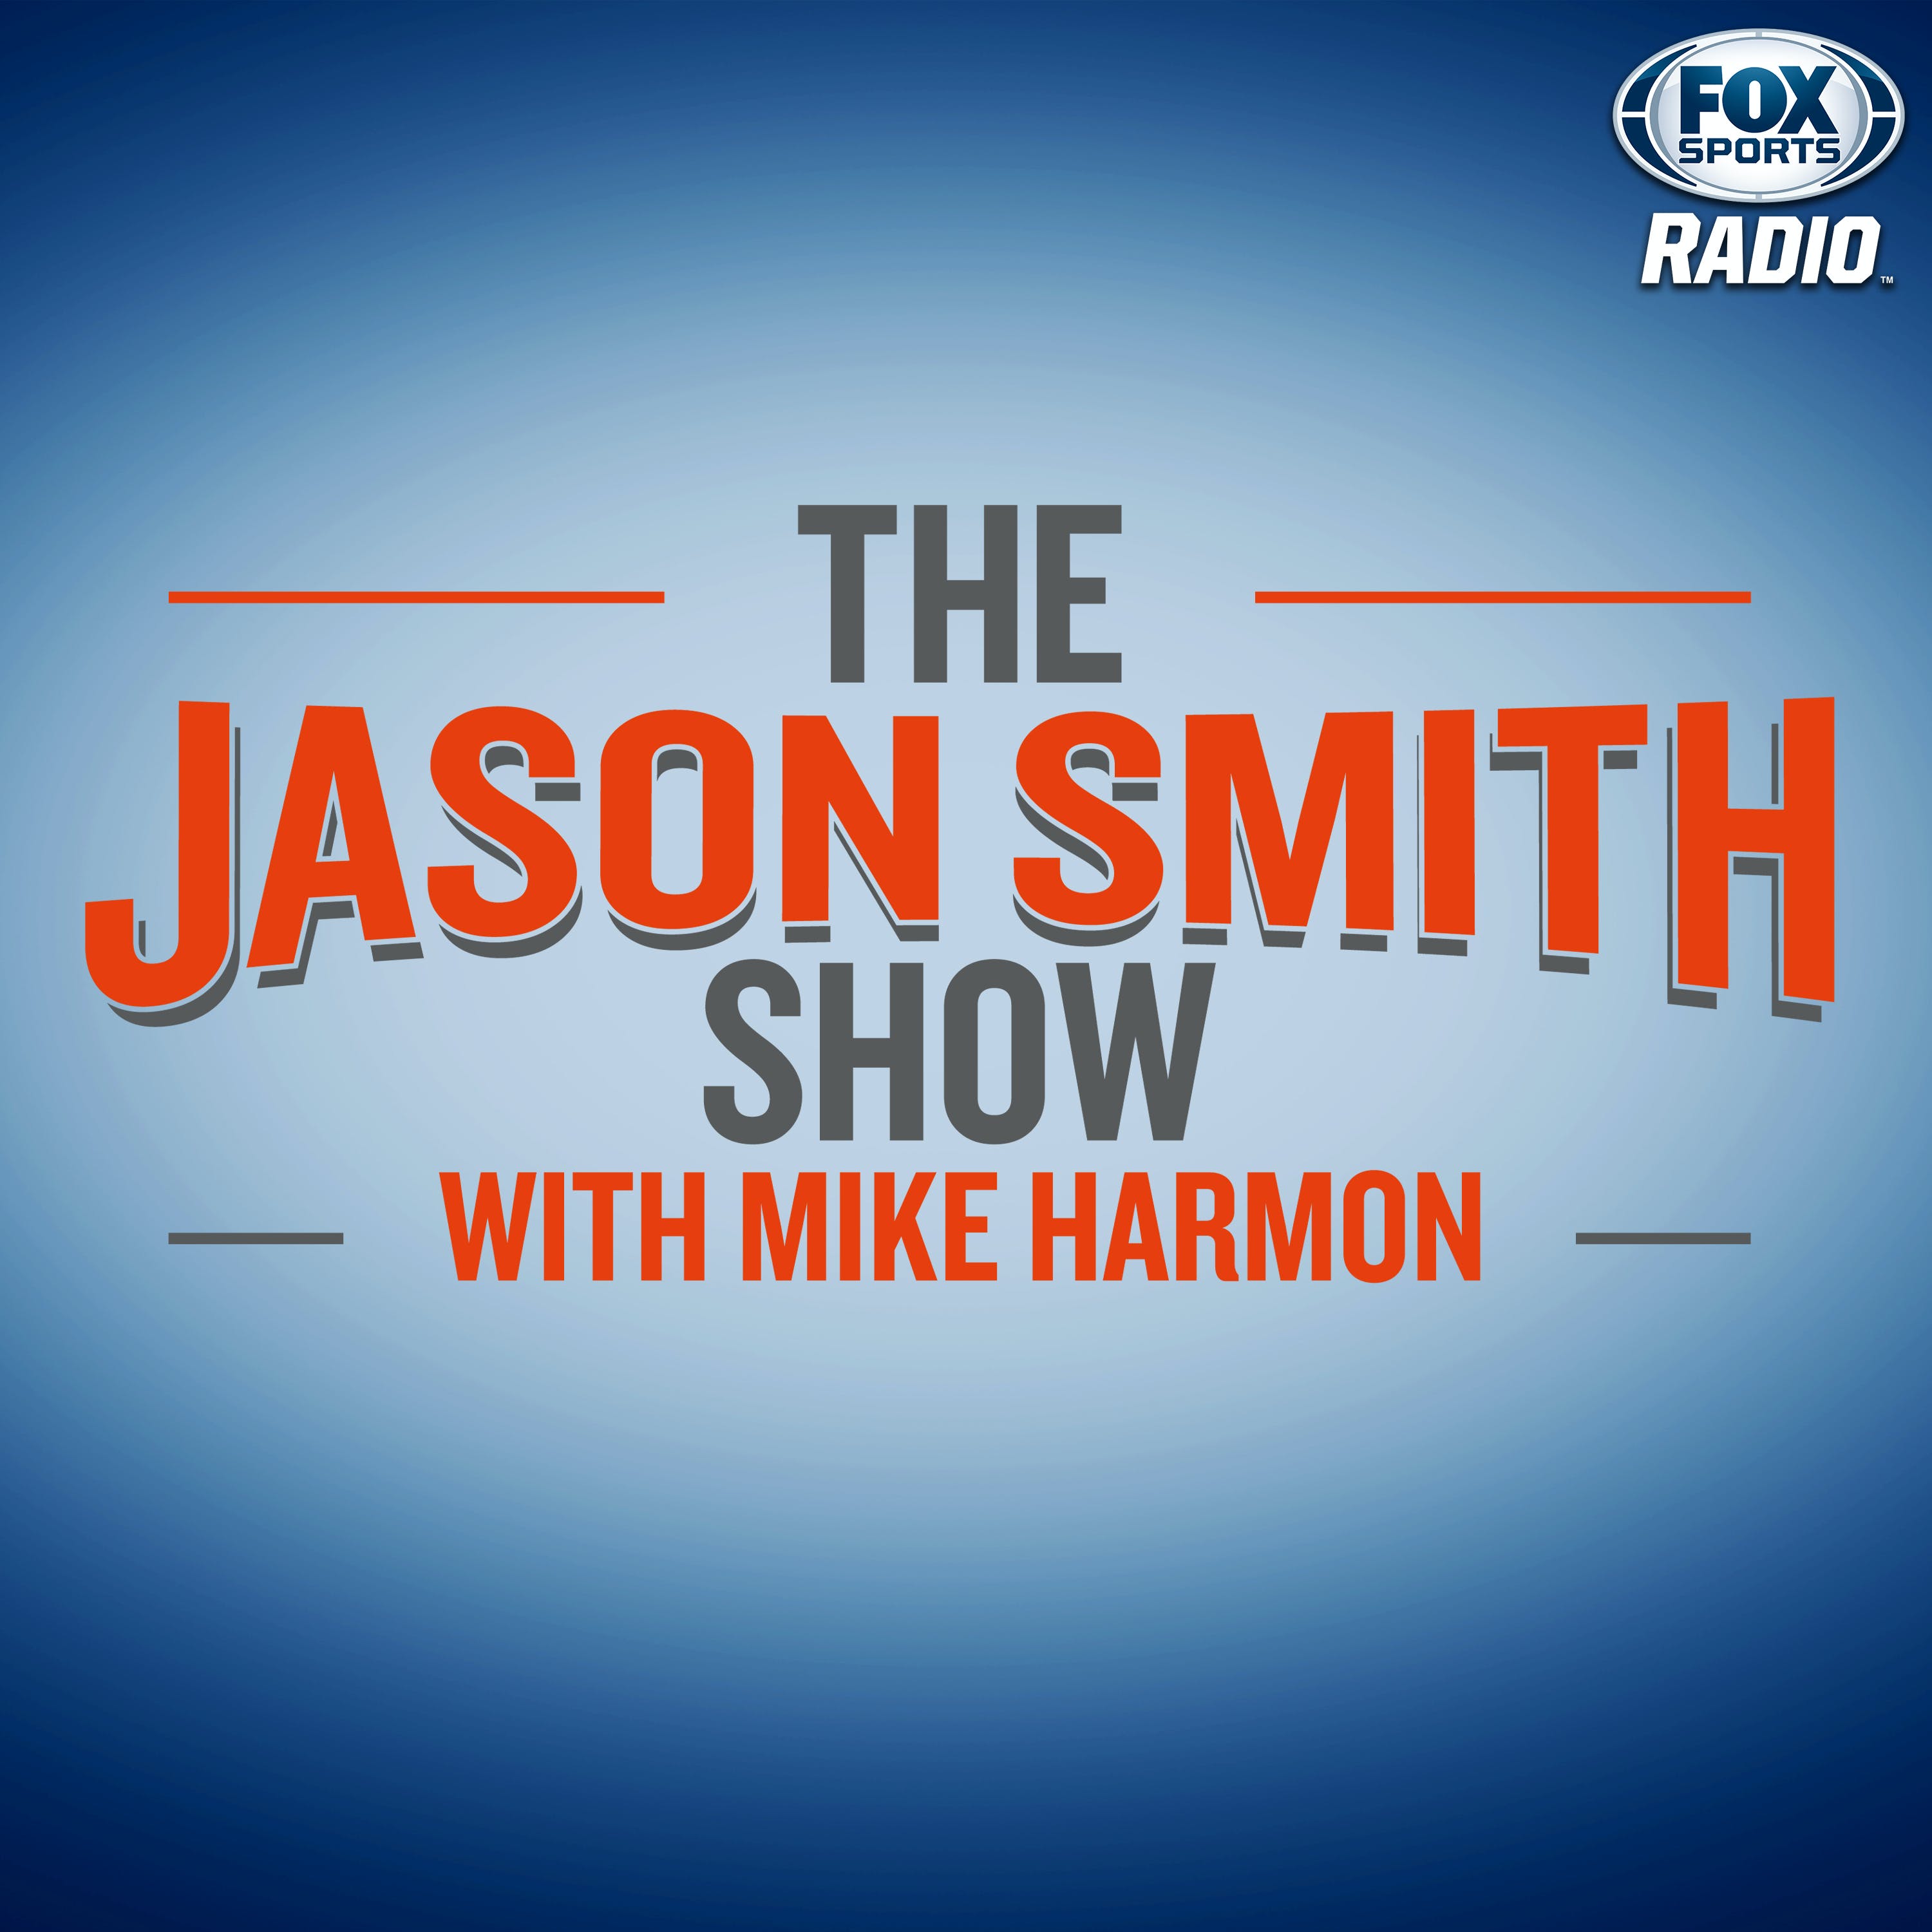 09/09/2021 - Best of The Jason Smith Show with Mike Harmon